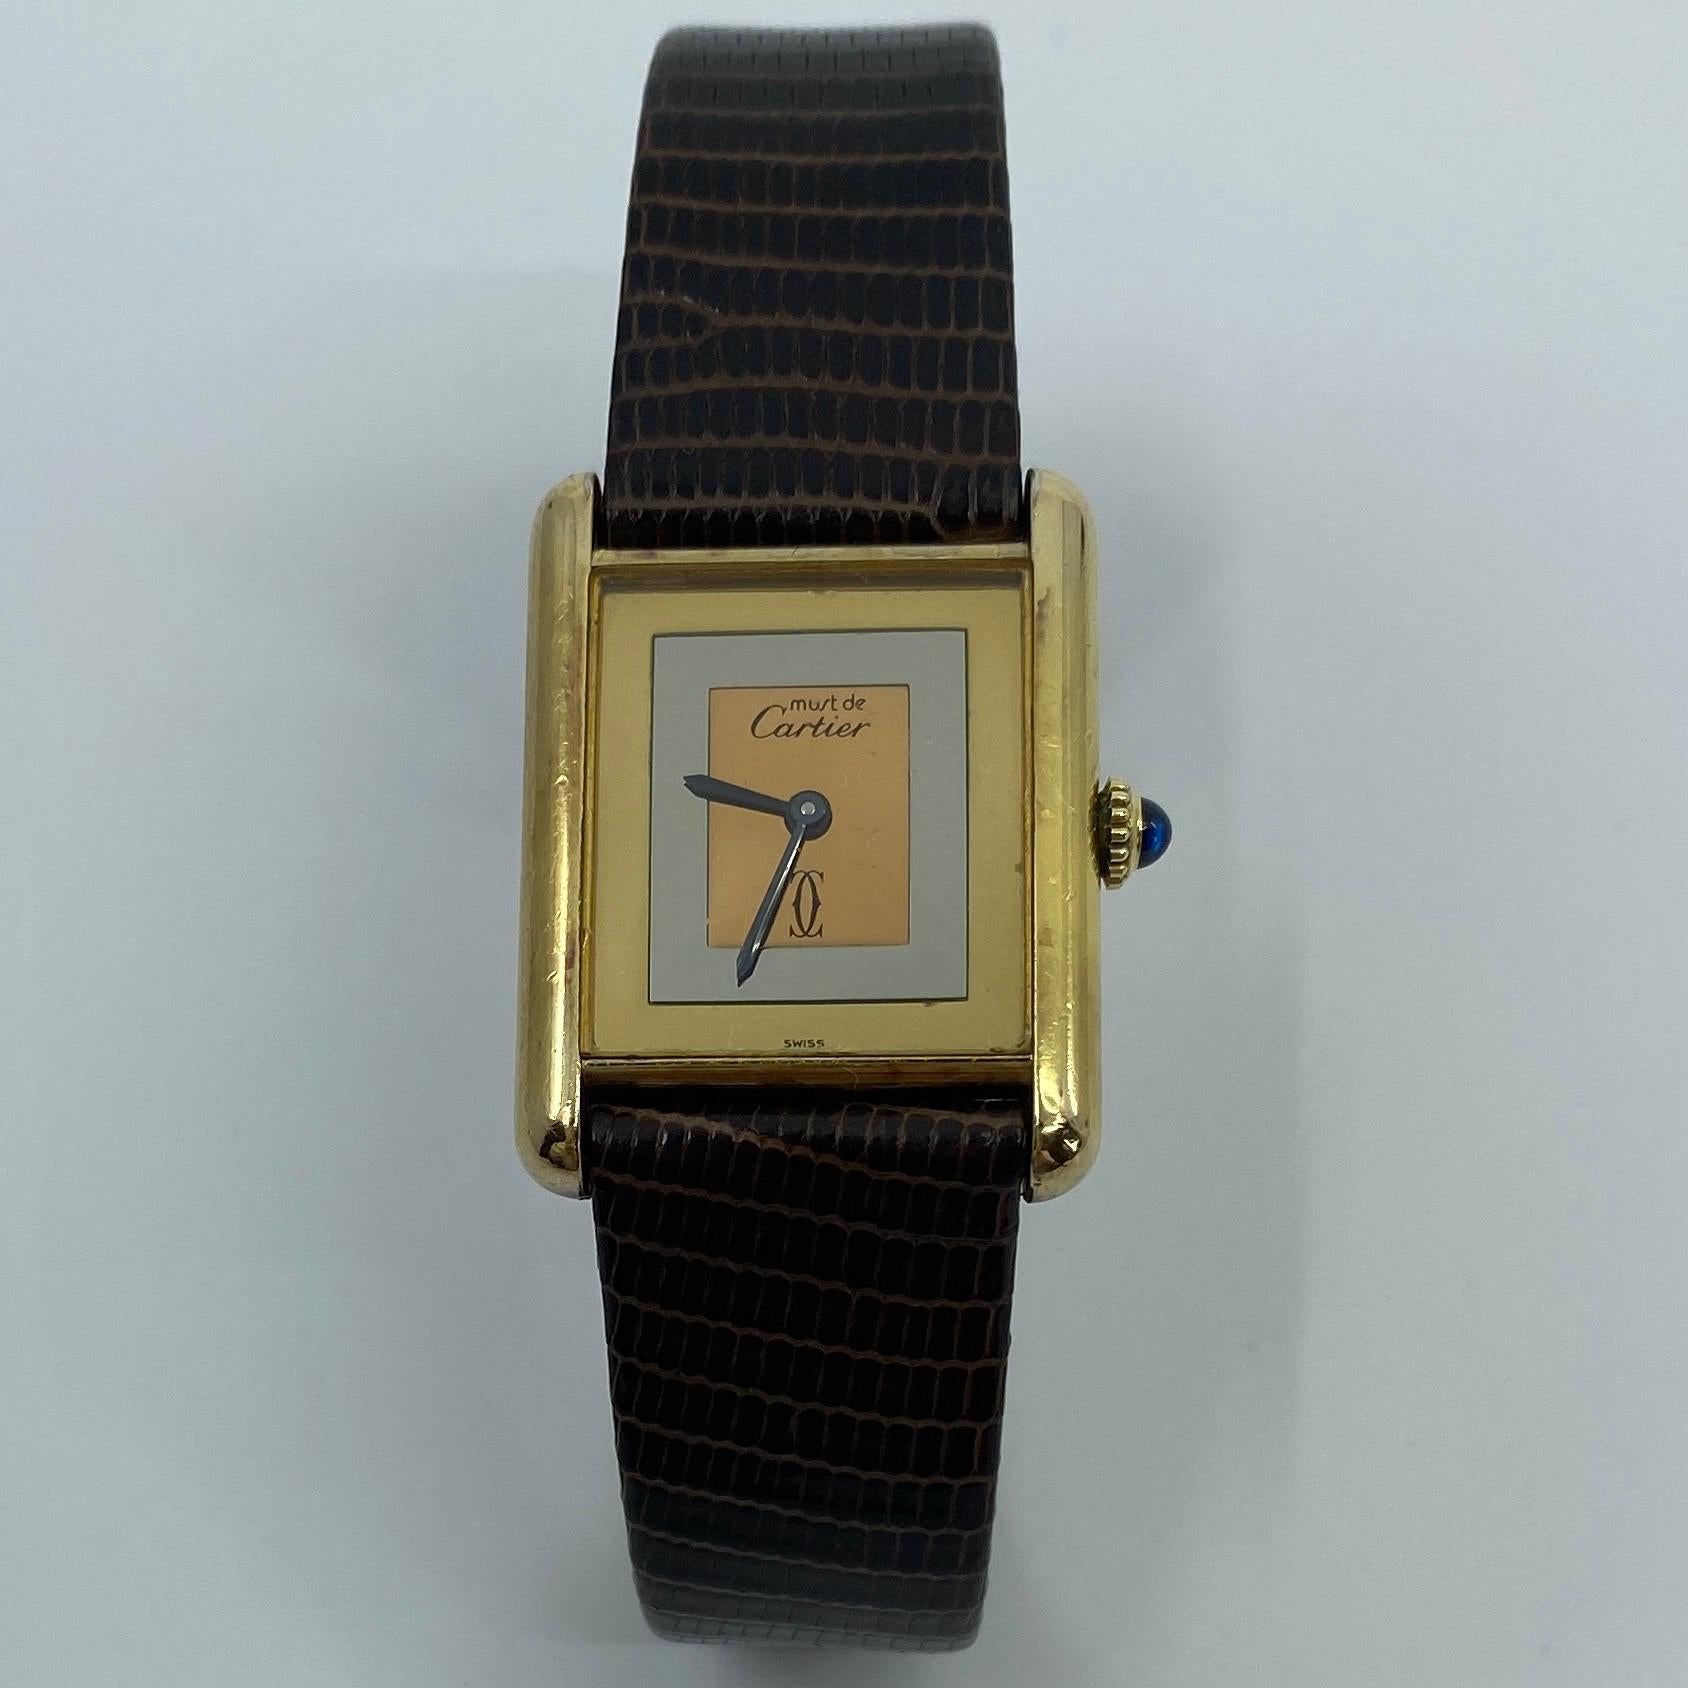 Vintage Cartier Must De Cartier Art Deco Style 18k Yellow Gold Plated Leather Watch.

Some signs of wear with scratches and marks on the case. Can be refurbished if requested. Strap has been replaced by Hirsch 8' water resistant leather